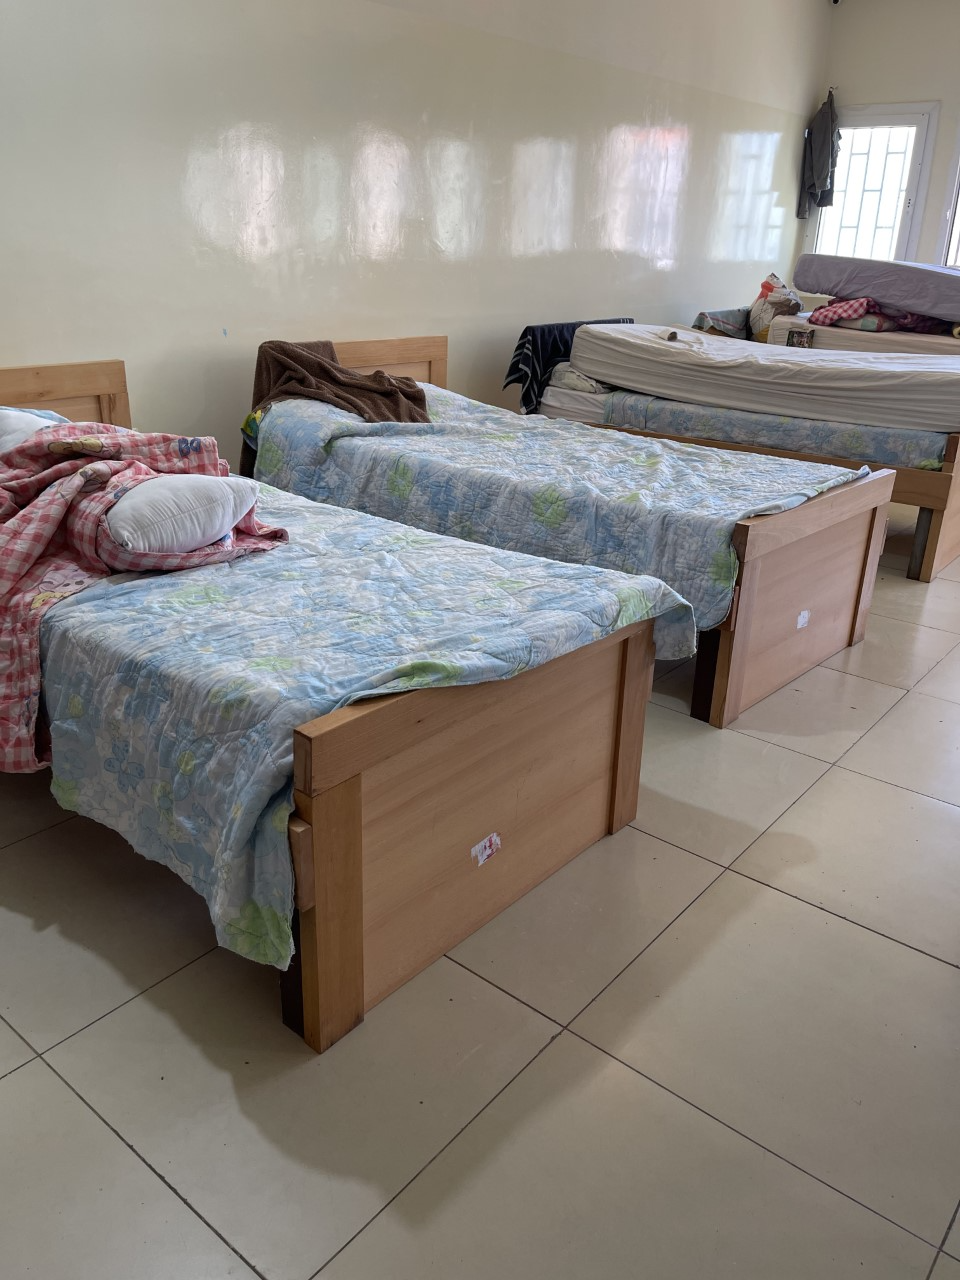  The children at Home of Hope sometimes act out their emotional upheaval in destructive ways such as breaking their beds. These new ones (which Outreach helped to secure) have fared well—-the staff encouraged each child to help build their own with t